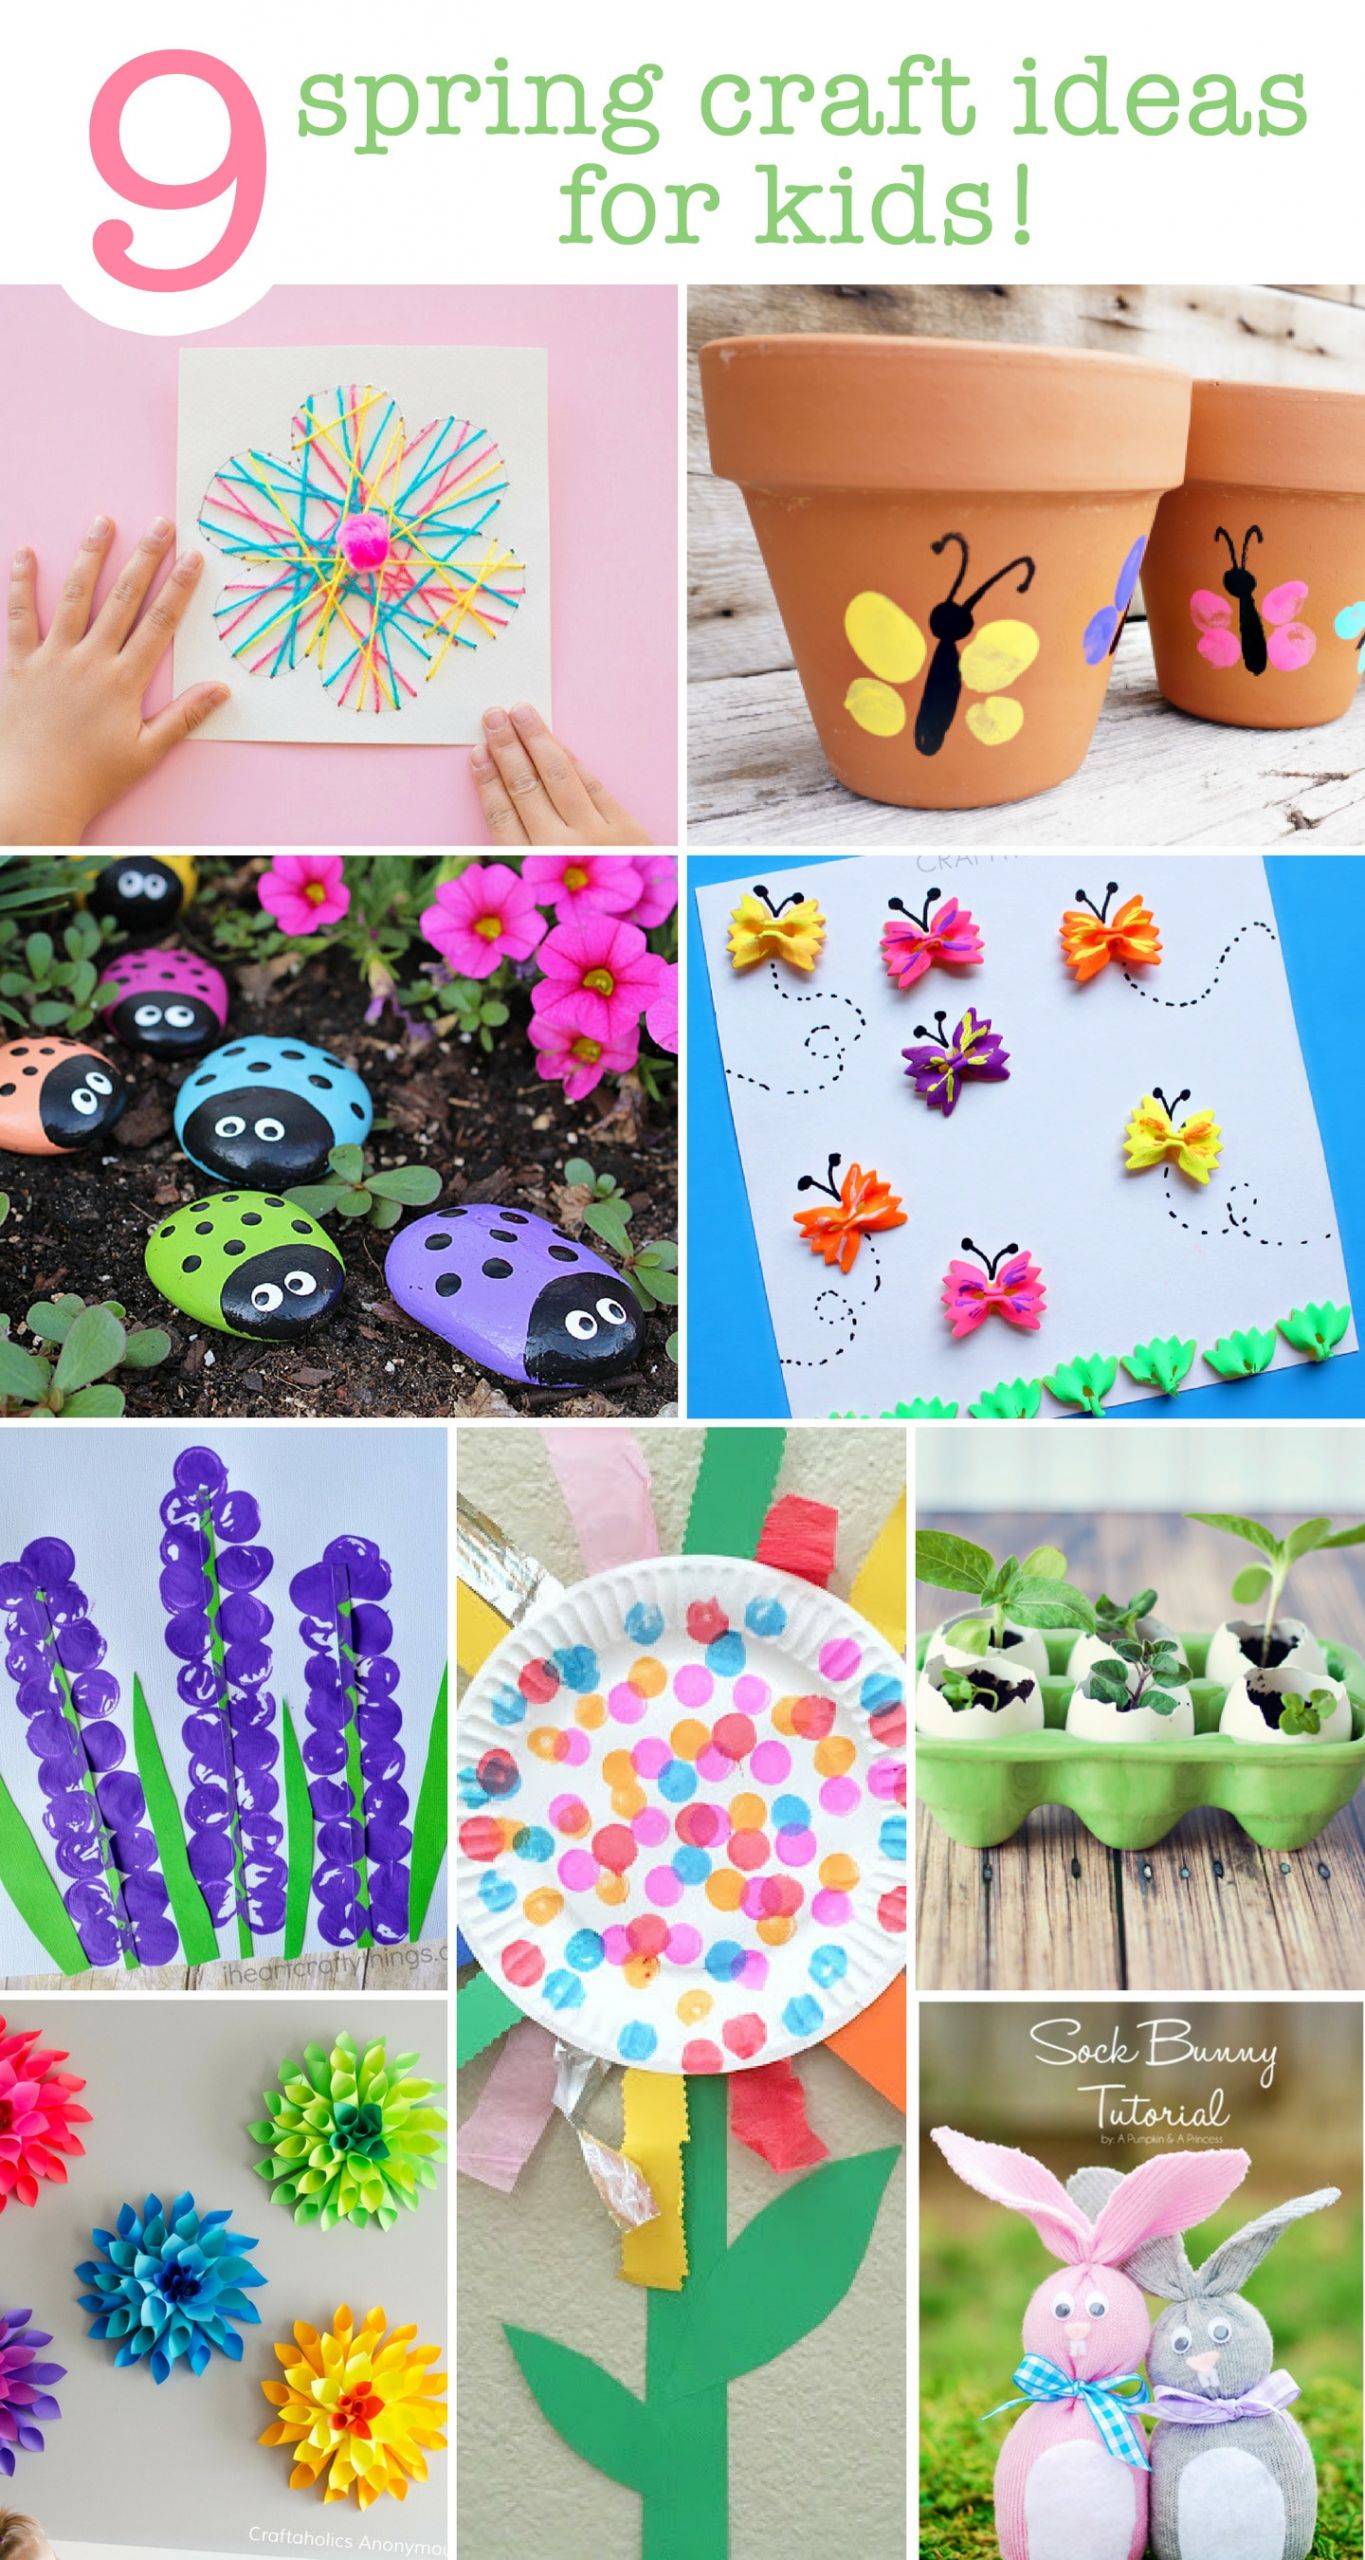 Craft Supplies For Kids
 9 Spring Craft Ideas For The Kids